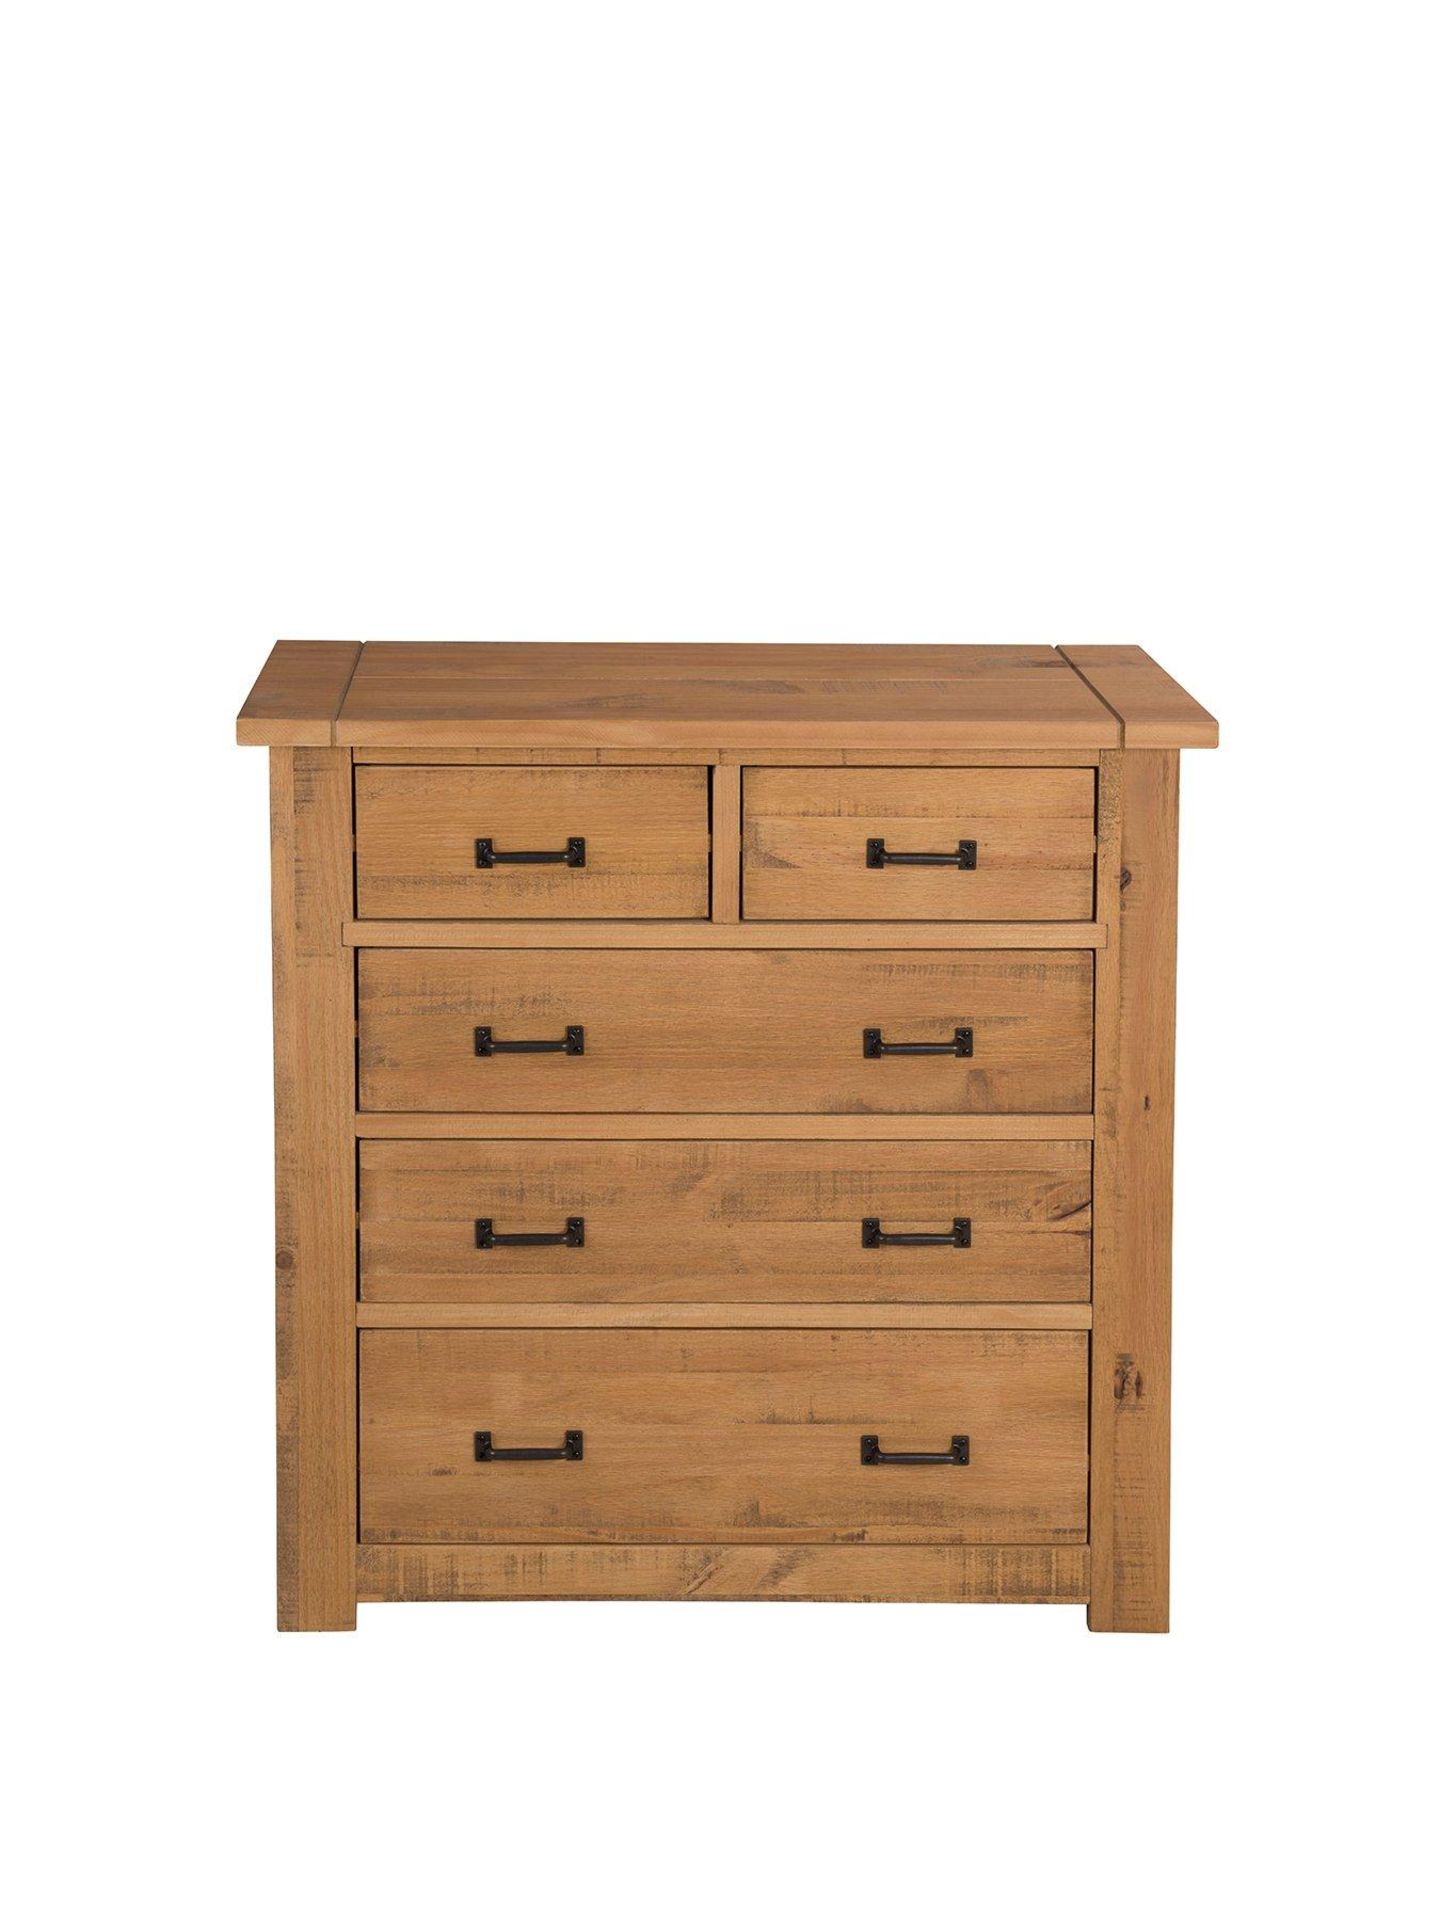 Boxed Item Albion 5 Drawers Chest [Pine] 95X90X40Cm rrp, £370.0